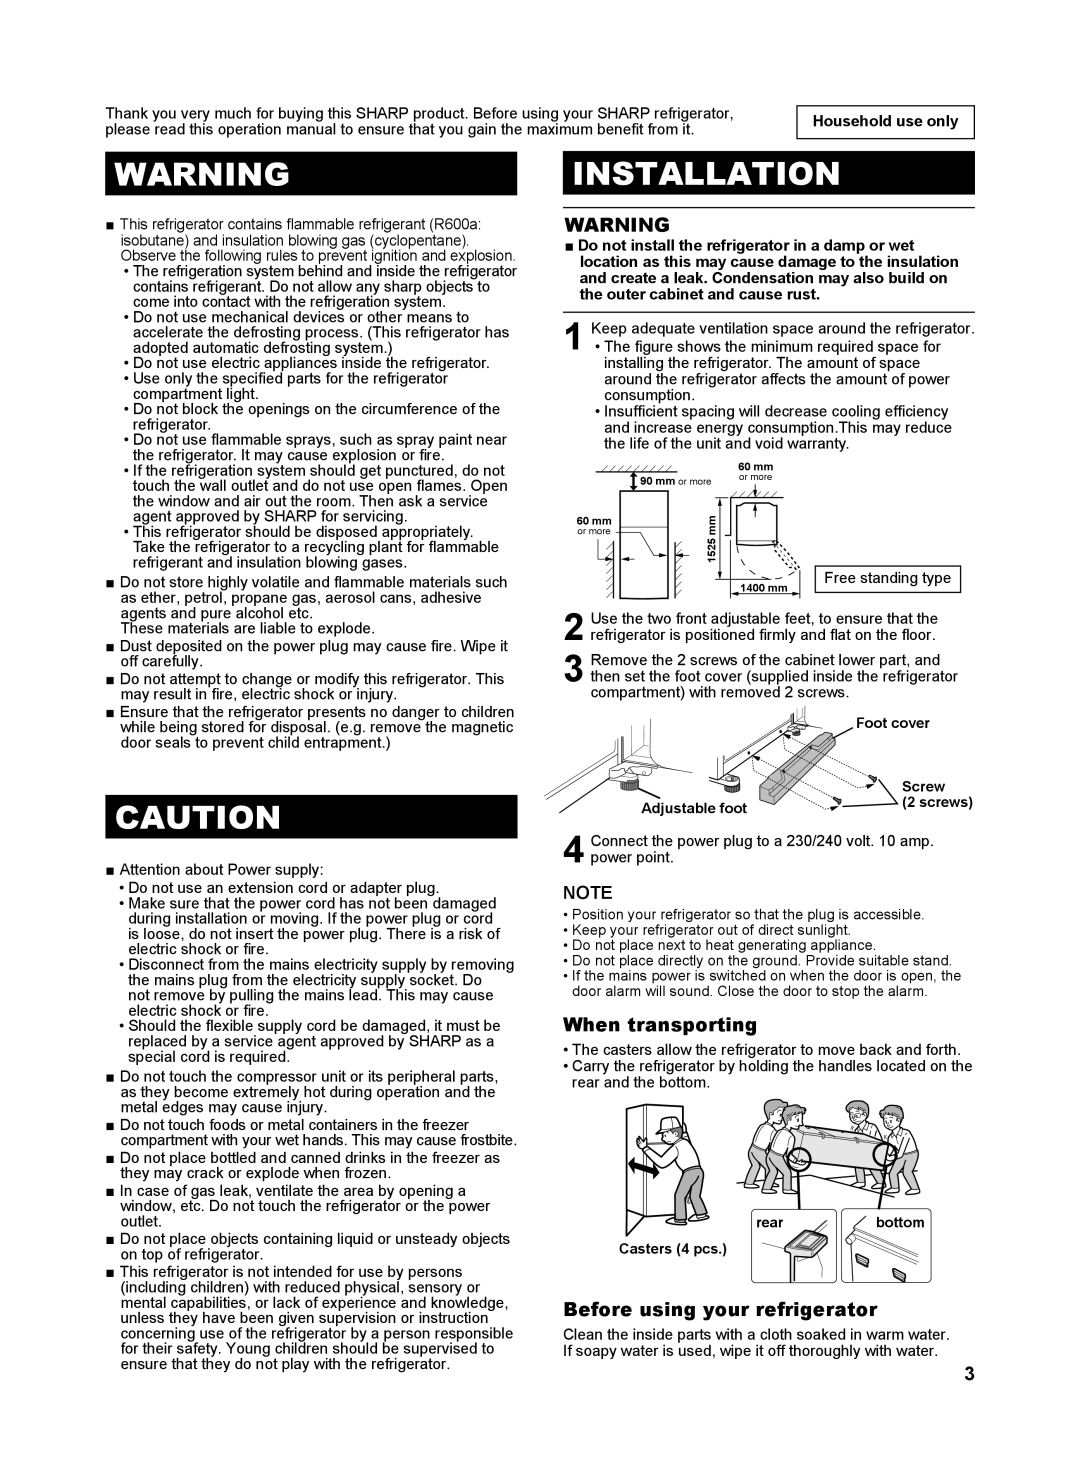 Sharp SJ-GC584R operation manual Installation, When transporting, Before using your refrigerator, Household use only 